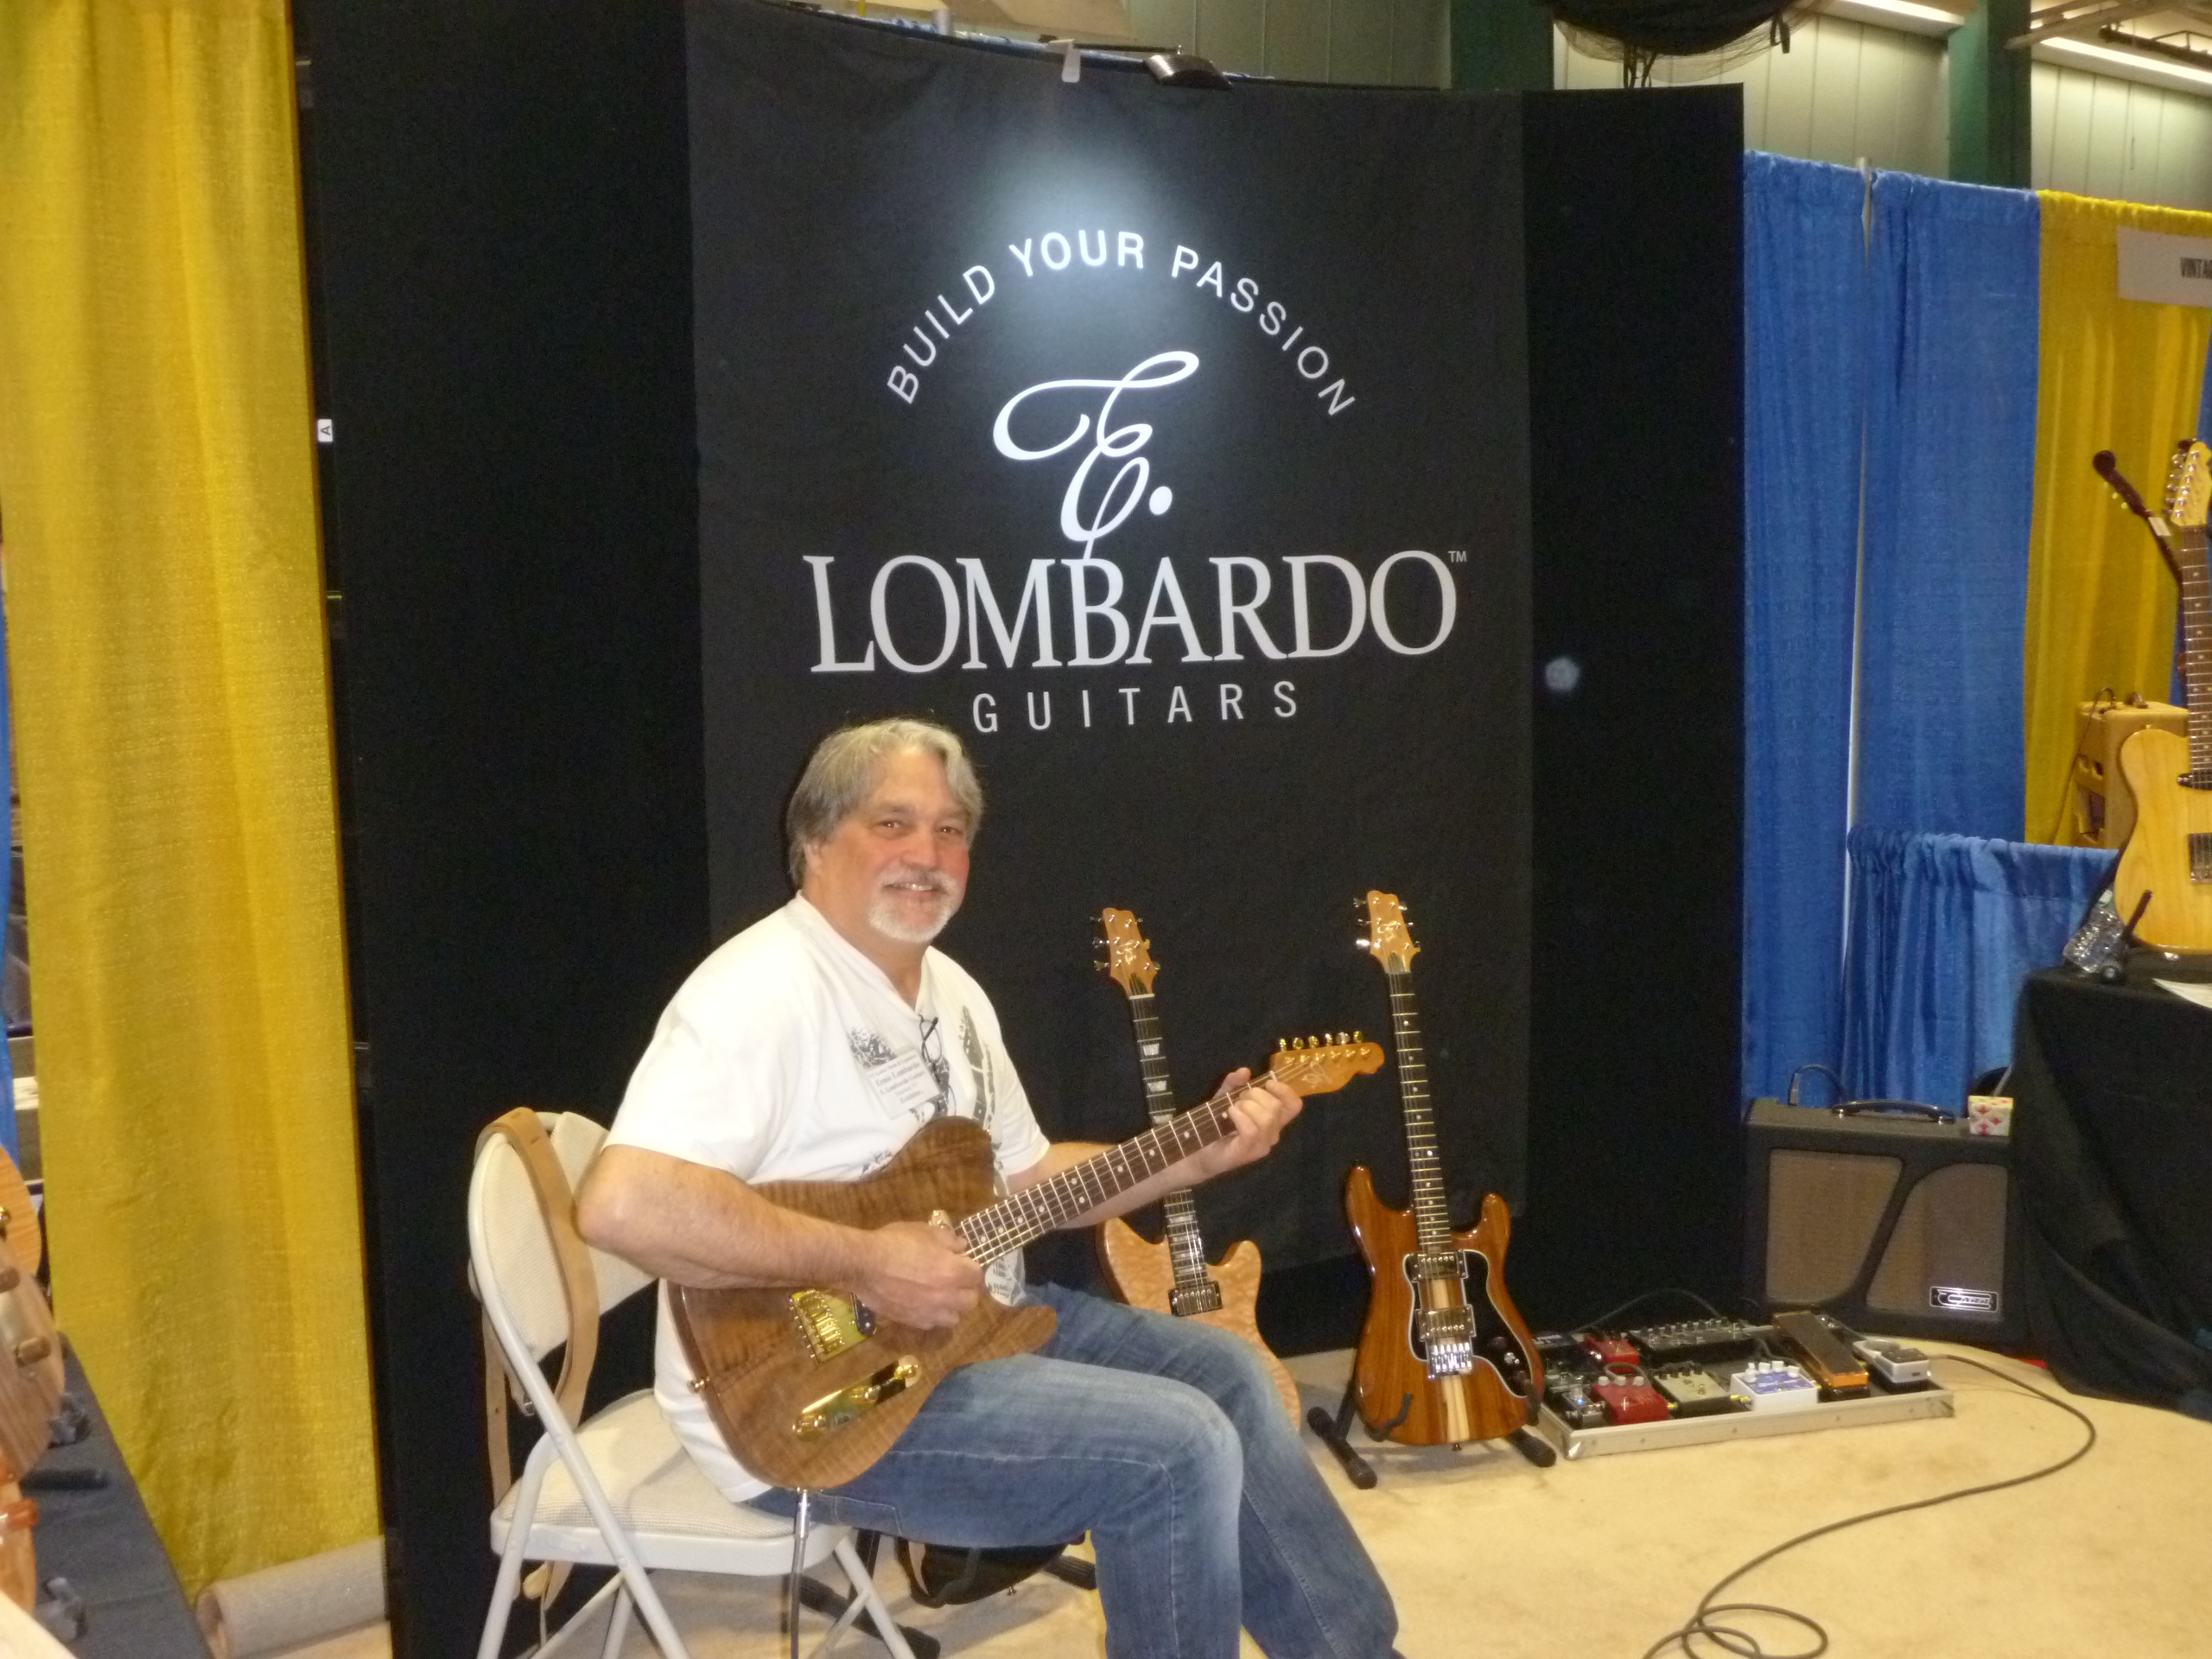 Ernie Lombardo of E. Lombardo Guitars with a fine looking display and better looking Lombardo Custom Guitar.